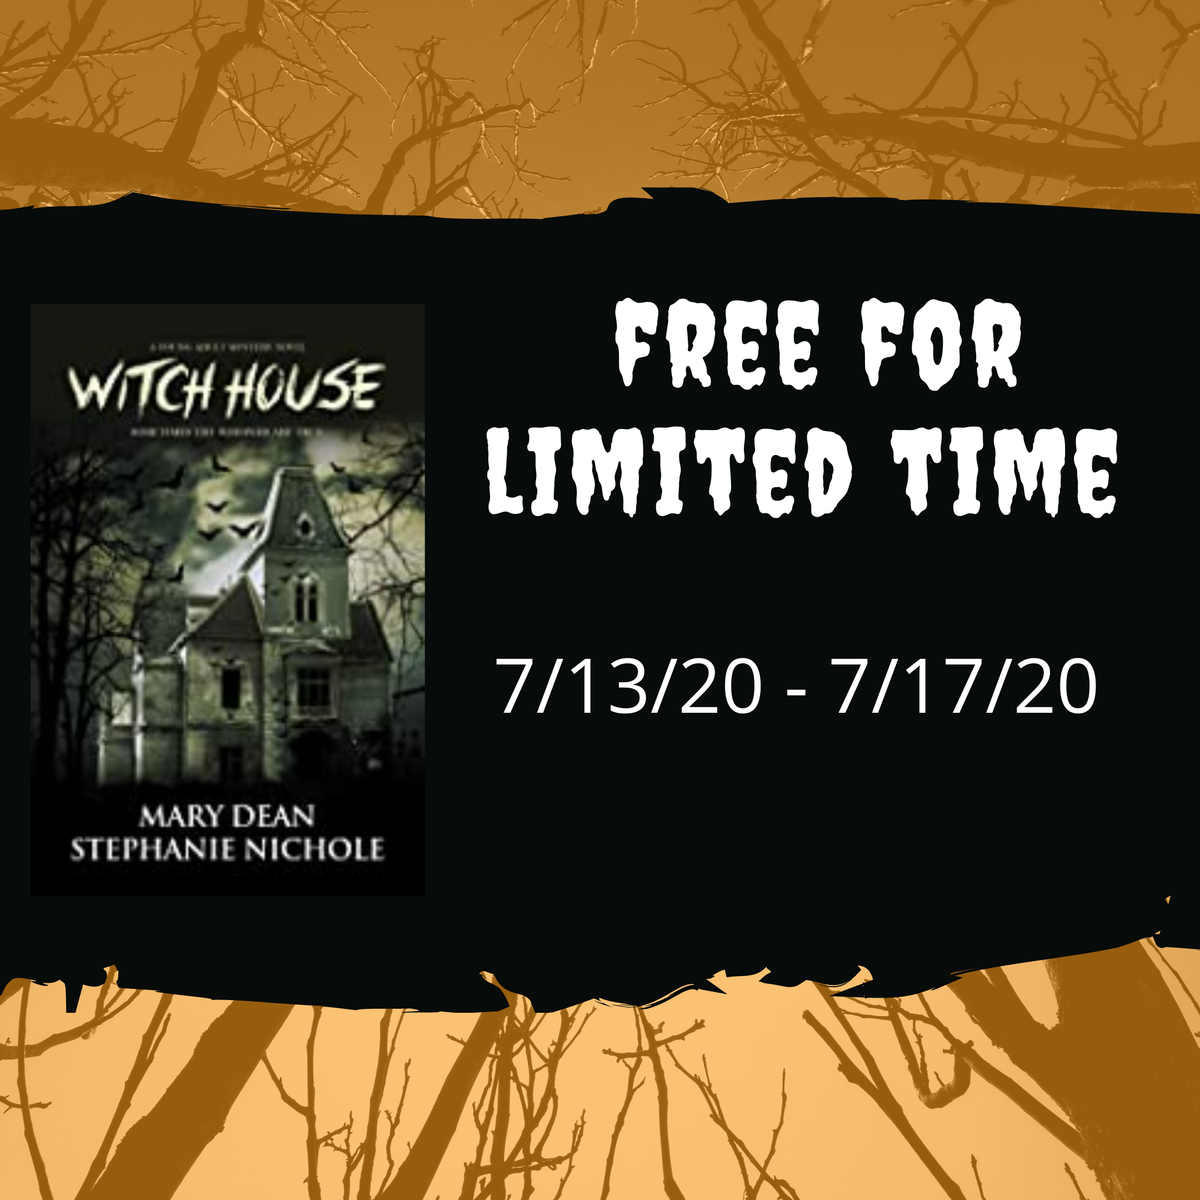 Witch House is free for the next 5 days!

Check out this young adult paranormal mystery I wrote with @snichole_author 

amazon.com/gp/product/B08…

#free #limitedtime #getyourcopy #marydean #stephanienichole #kingstonpublishingcompany #sale #youngadult #paranormal #mystery